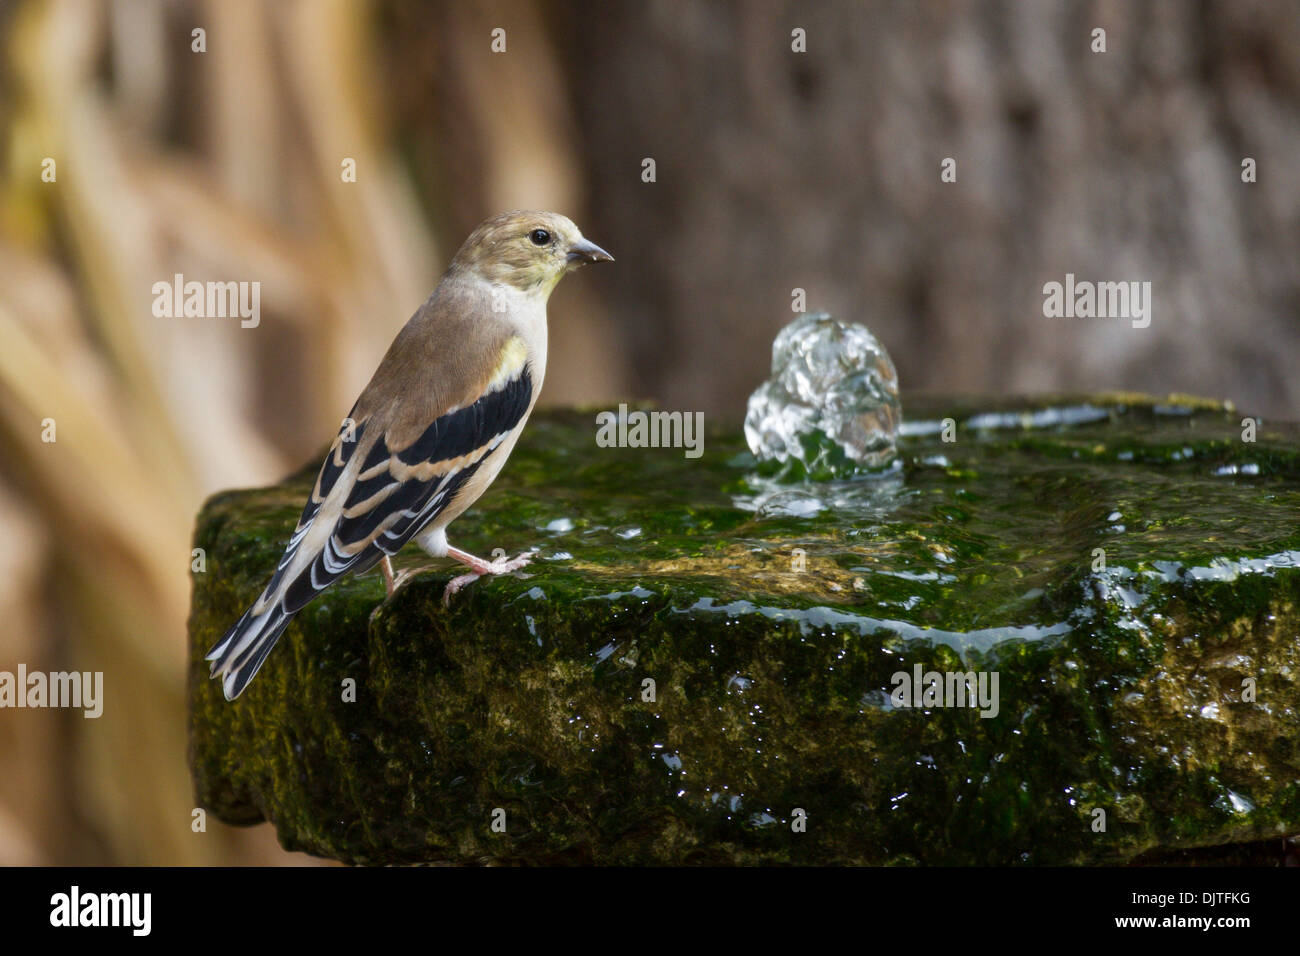 American Goldfinch, Carduelis tristis at water fountain at Gary Carter's backyard wildlife habitat in McLeansville, North Carolina. Stock Photo